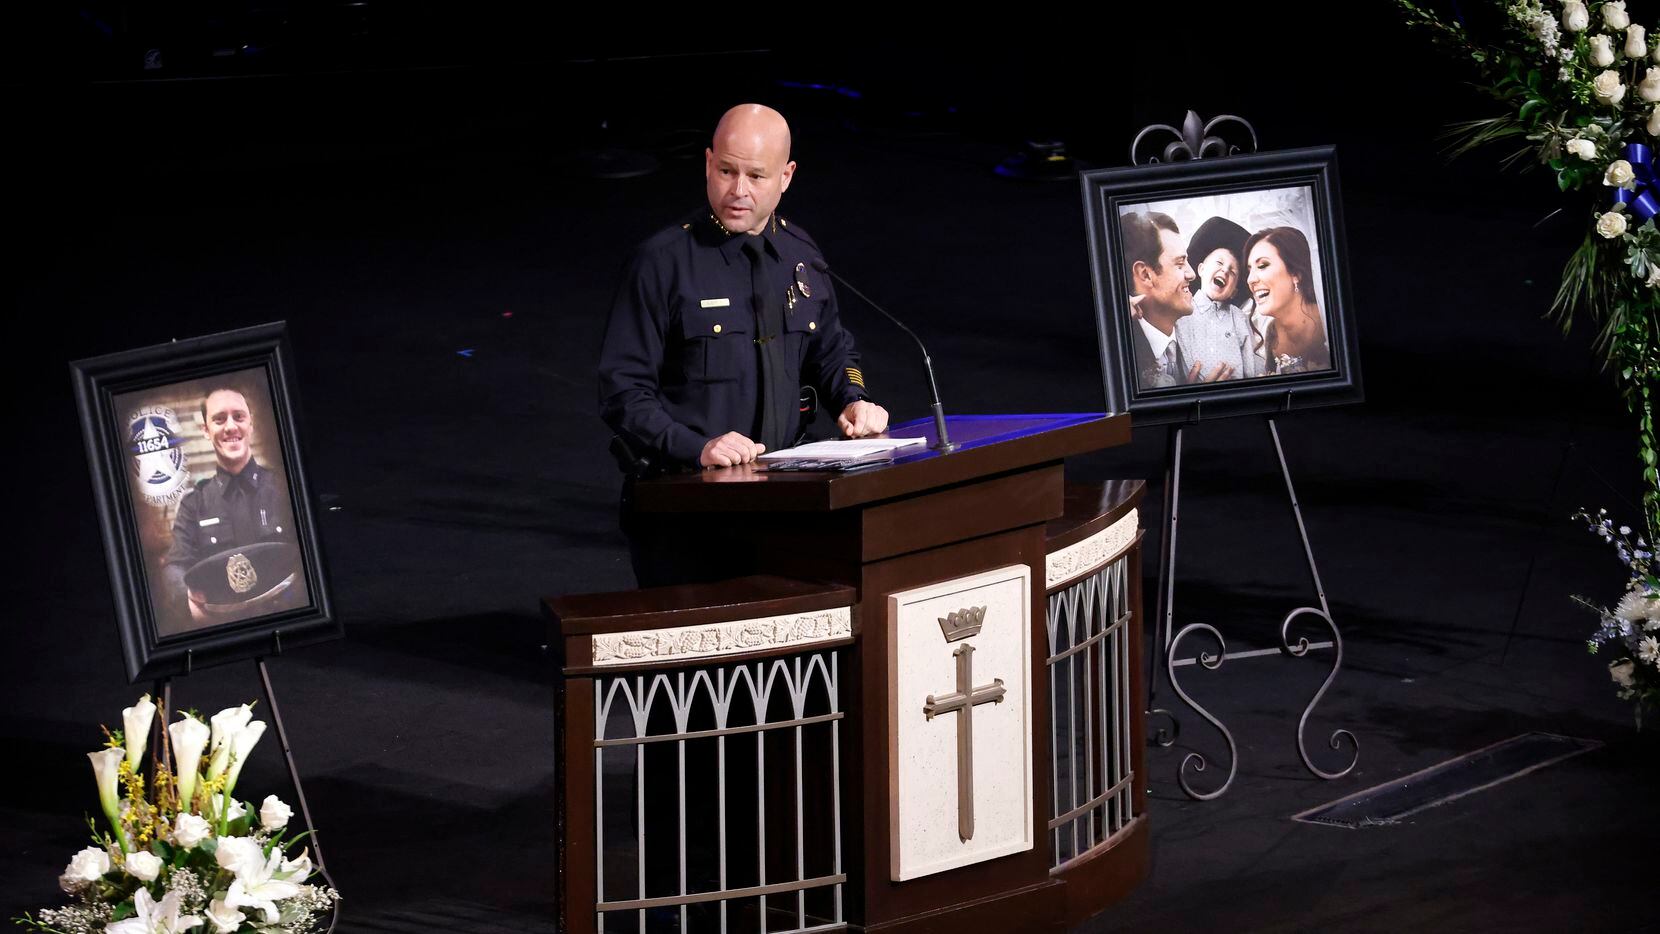 Police Chief Eddie Garcia, just weeks after starting his job in Dallas, addressed the congregation during the funeral service for Dallas officer Mitchell Penton. Penton was killed Feb. 13 by a man who was indicted in May on a felony charge of intoxication manslaughter causing the death of a peace officer.